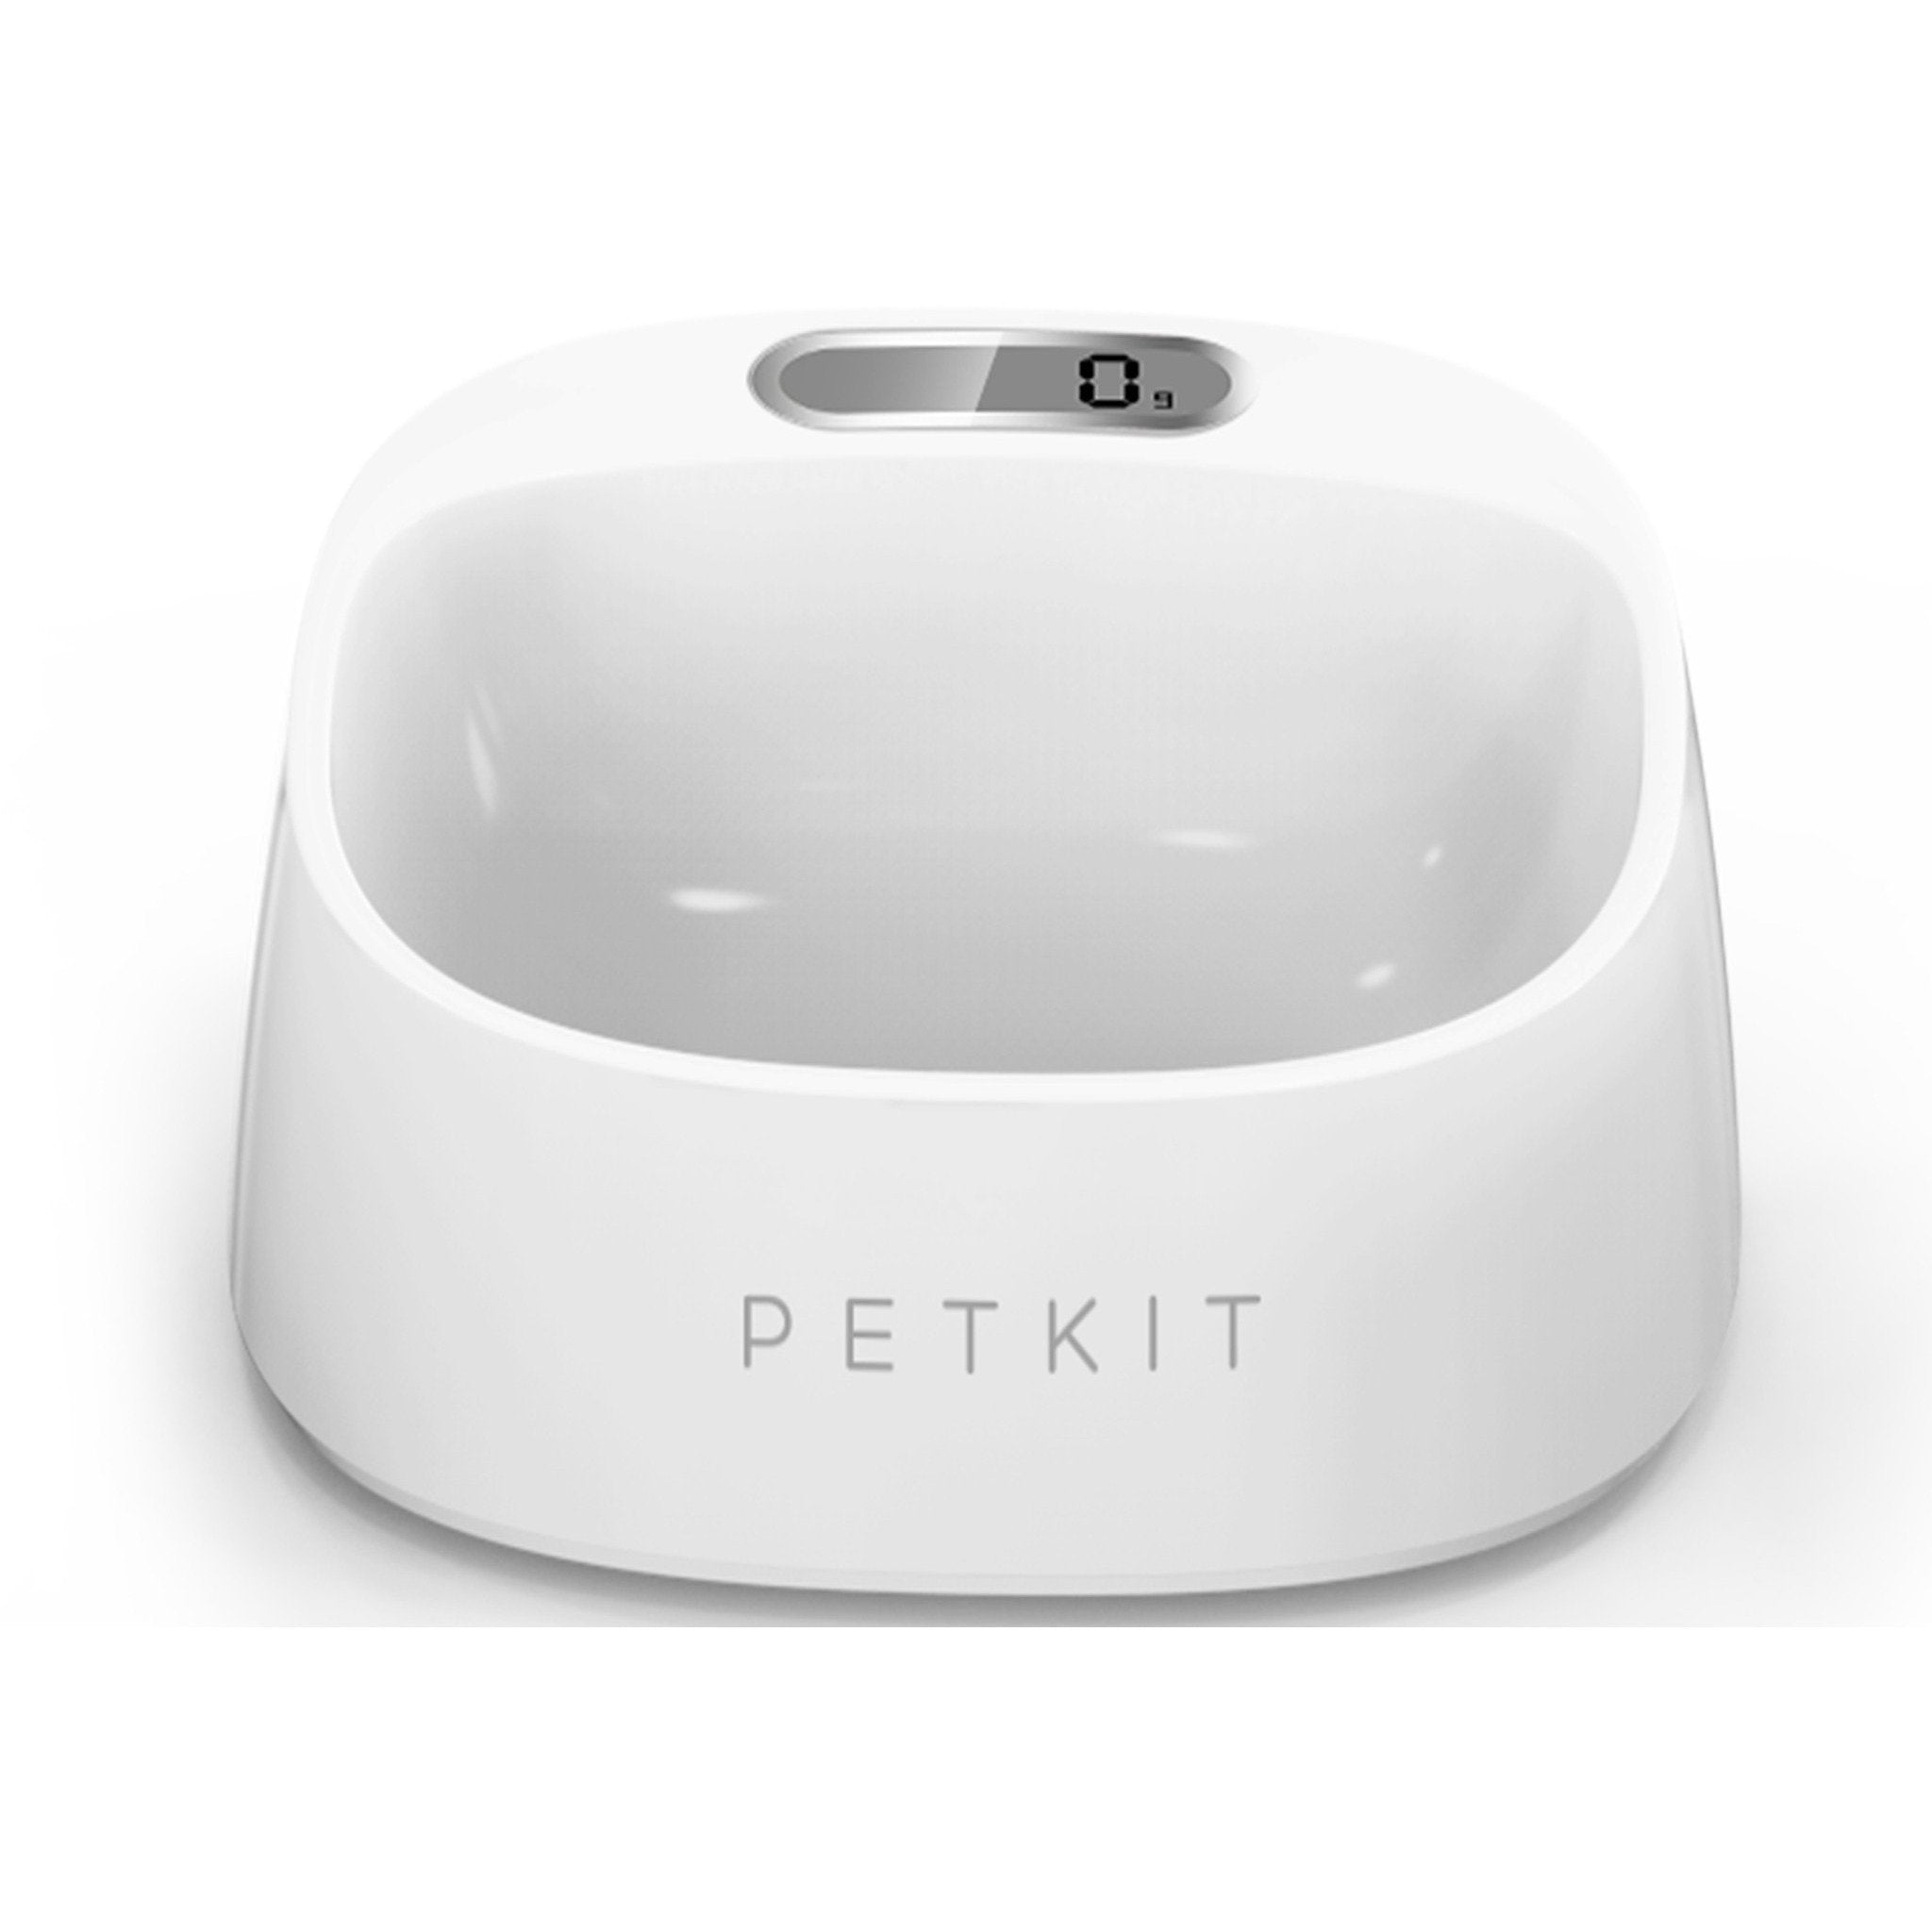 PETKIT ® 'FRESH' Anti-Bacterial Waterproof Smart Food Weight Calculating Digital Scale Pet Cat Dog Bowl Feeder w/ Inlcuded Batteries White 